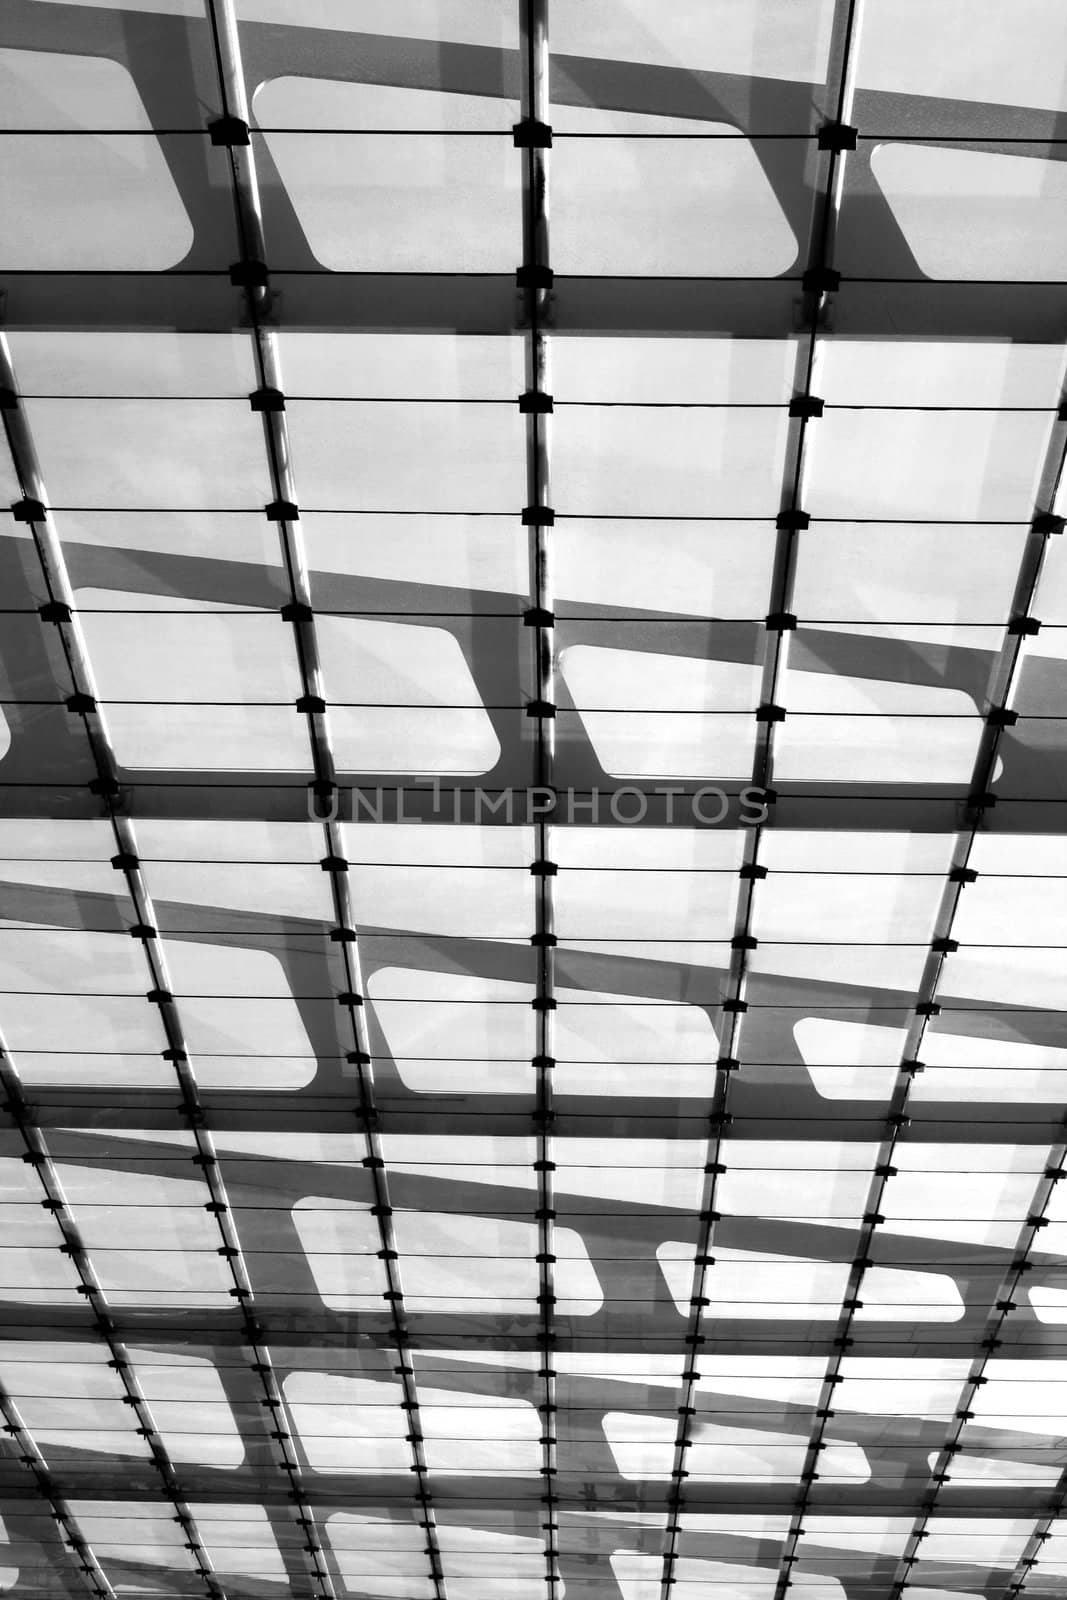 Modern glass and steel ceiling. Construction was finished in 2003.